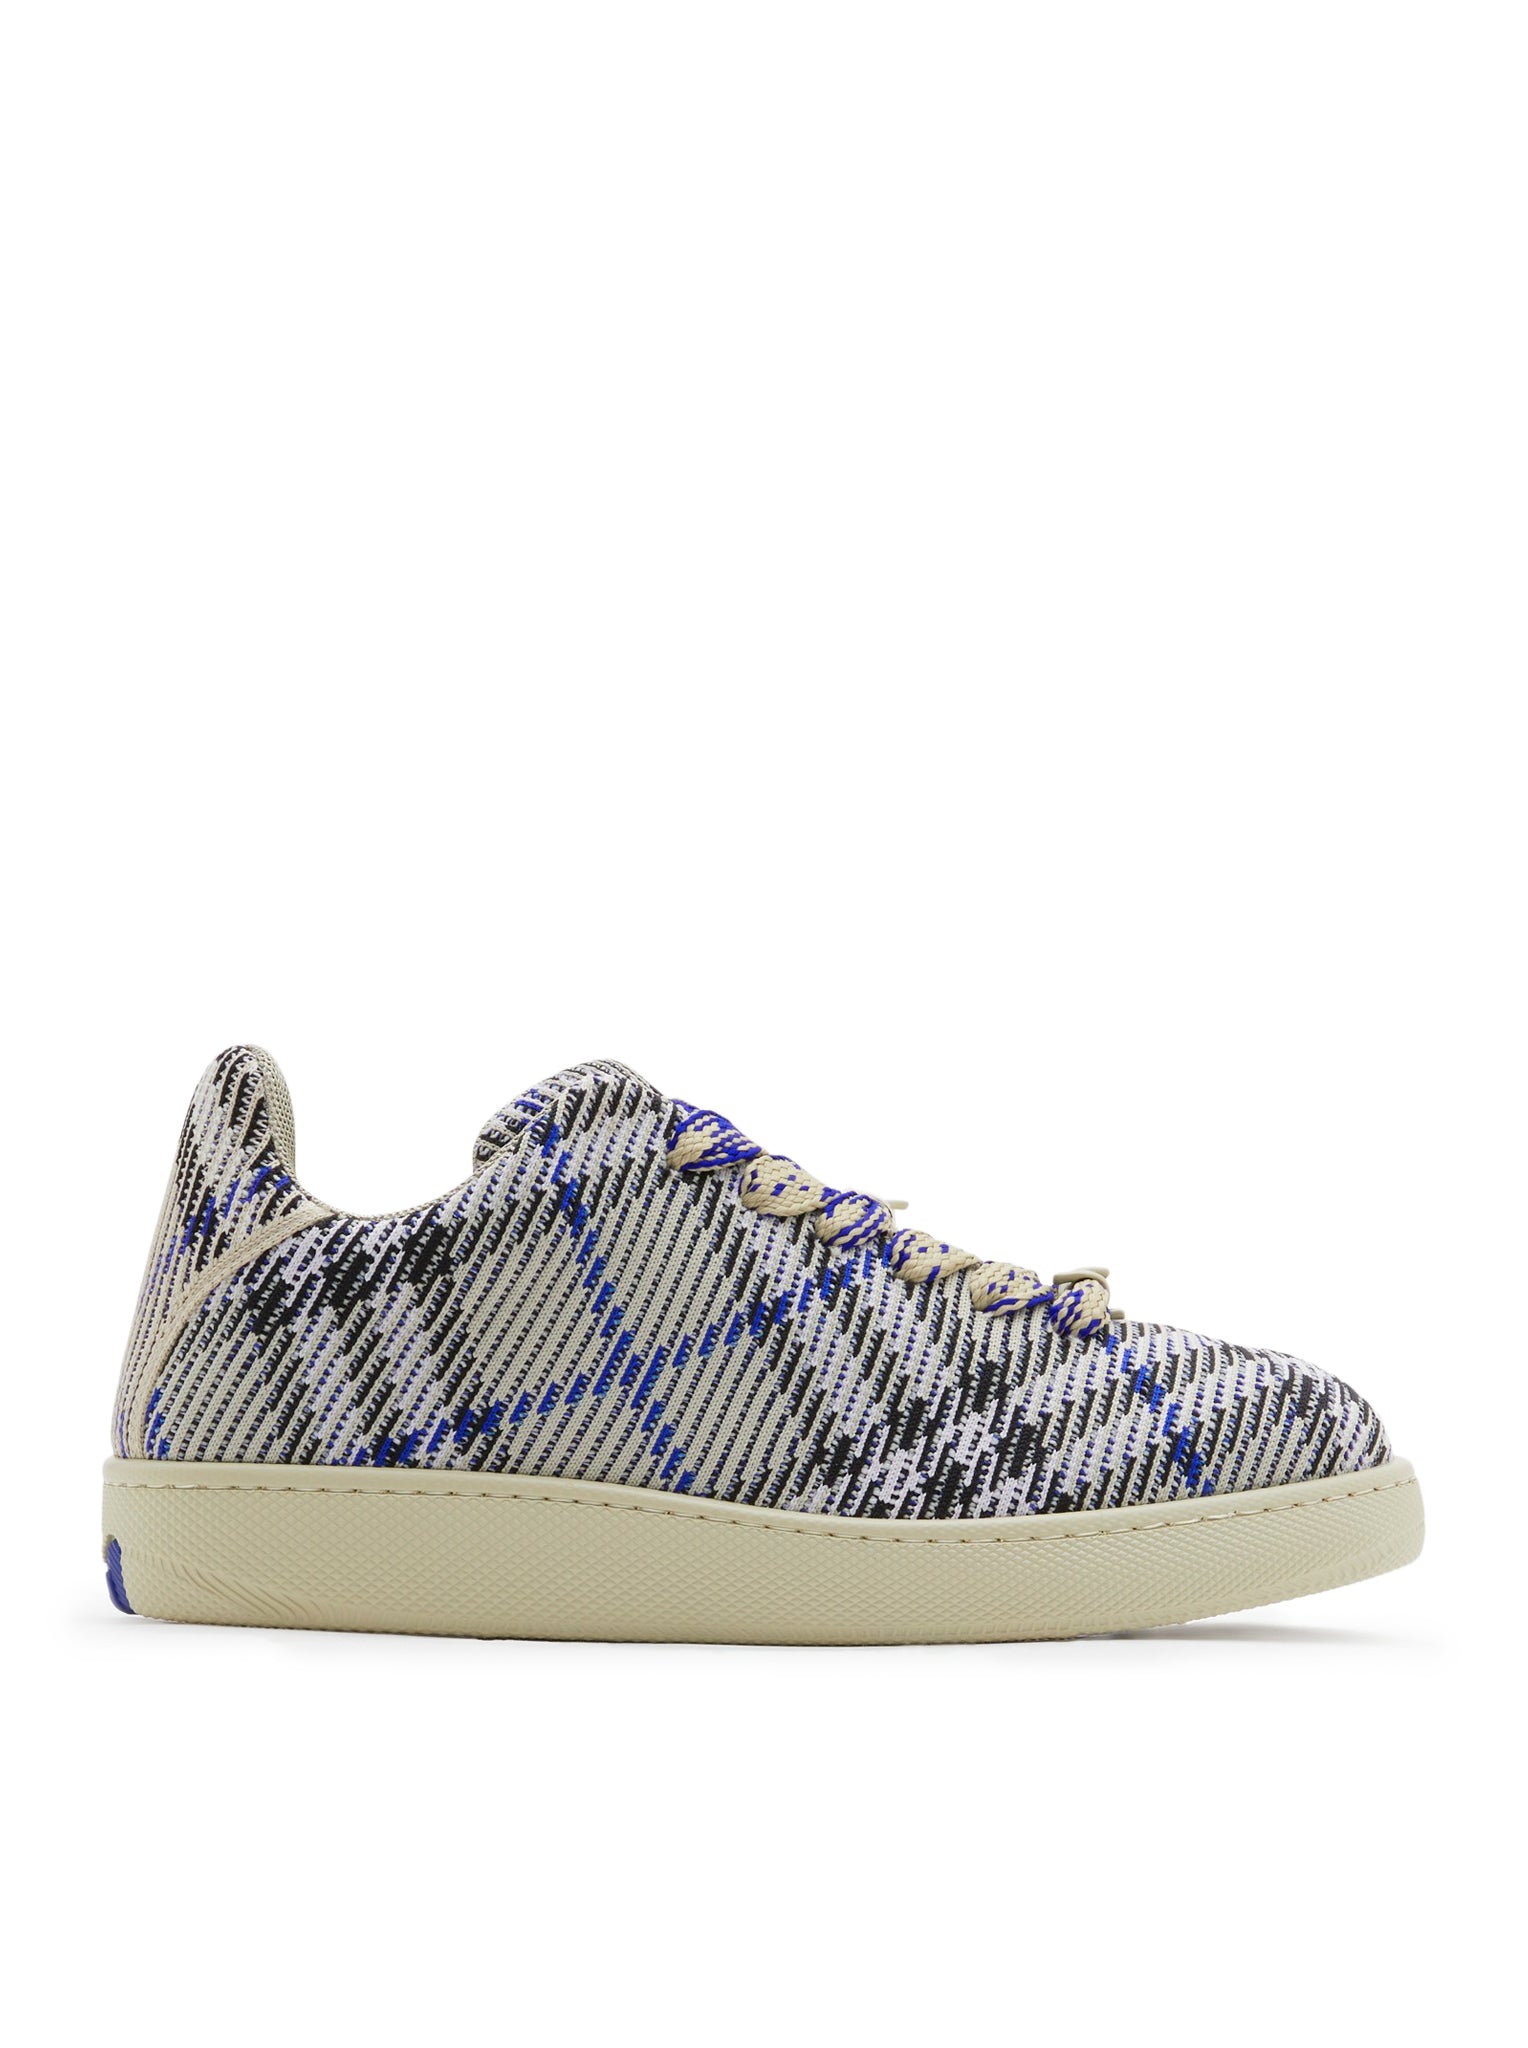 Box sneaker with knitted Check